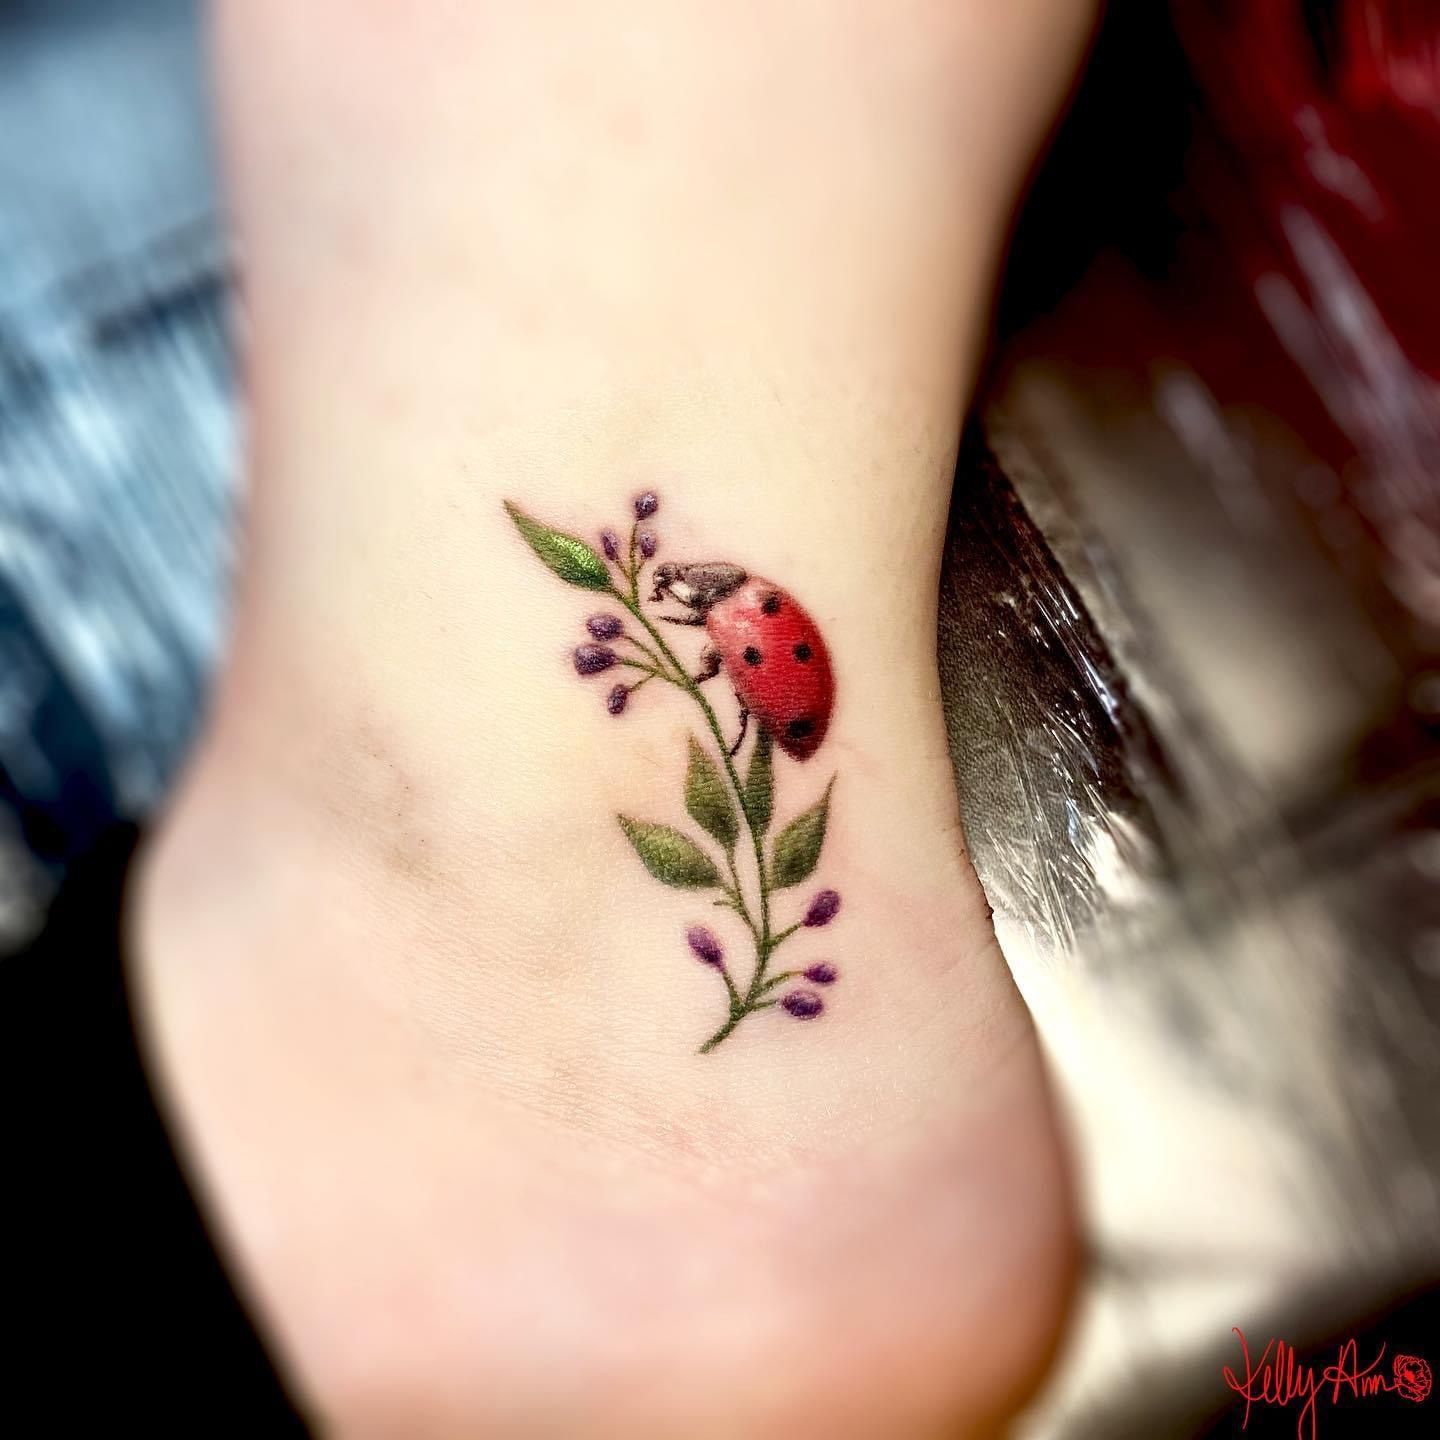 Small pink rose and ladybug tattoo on the inner